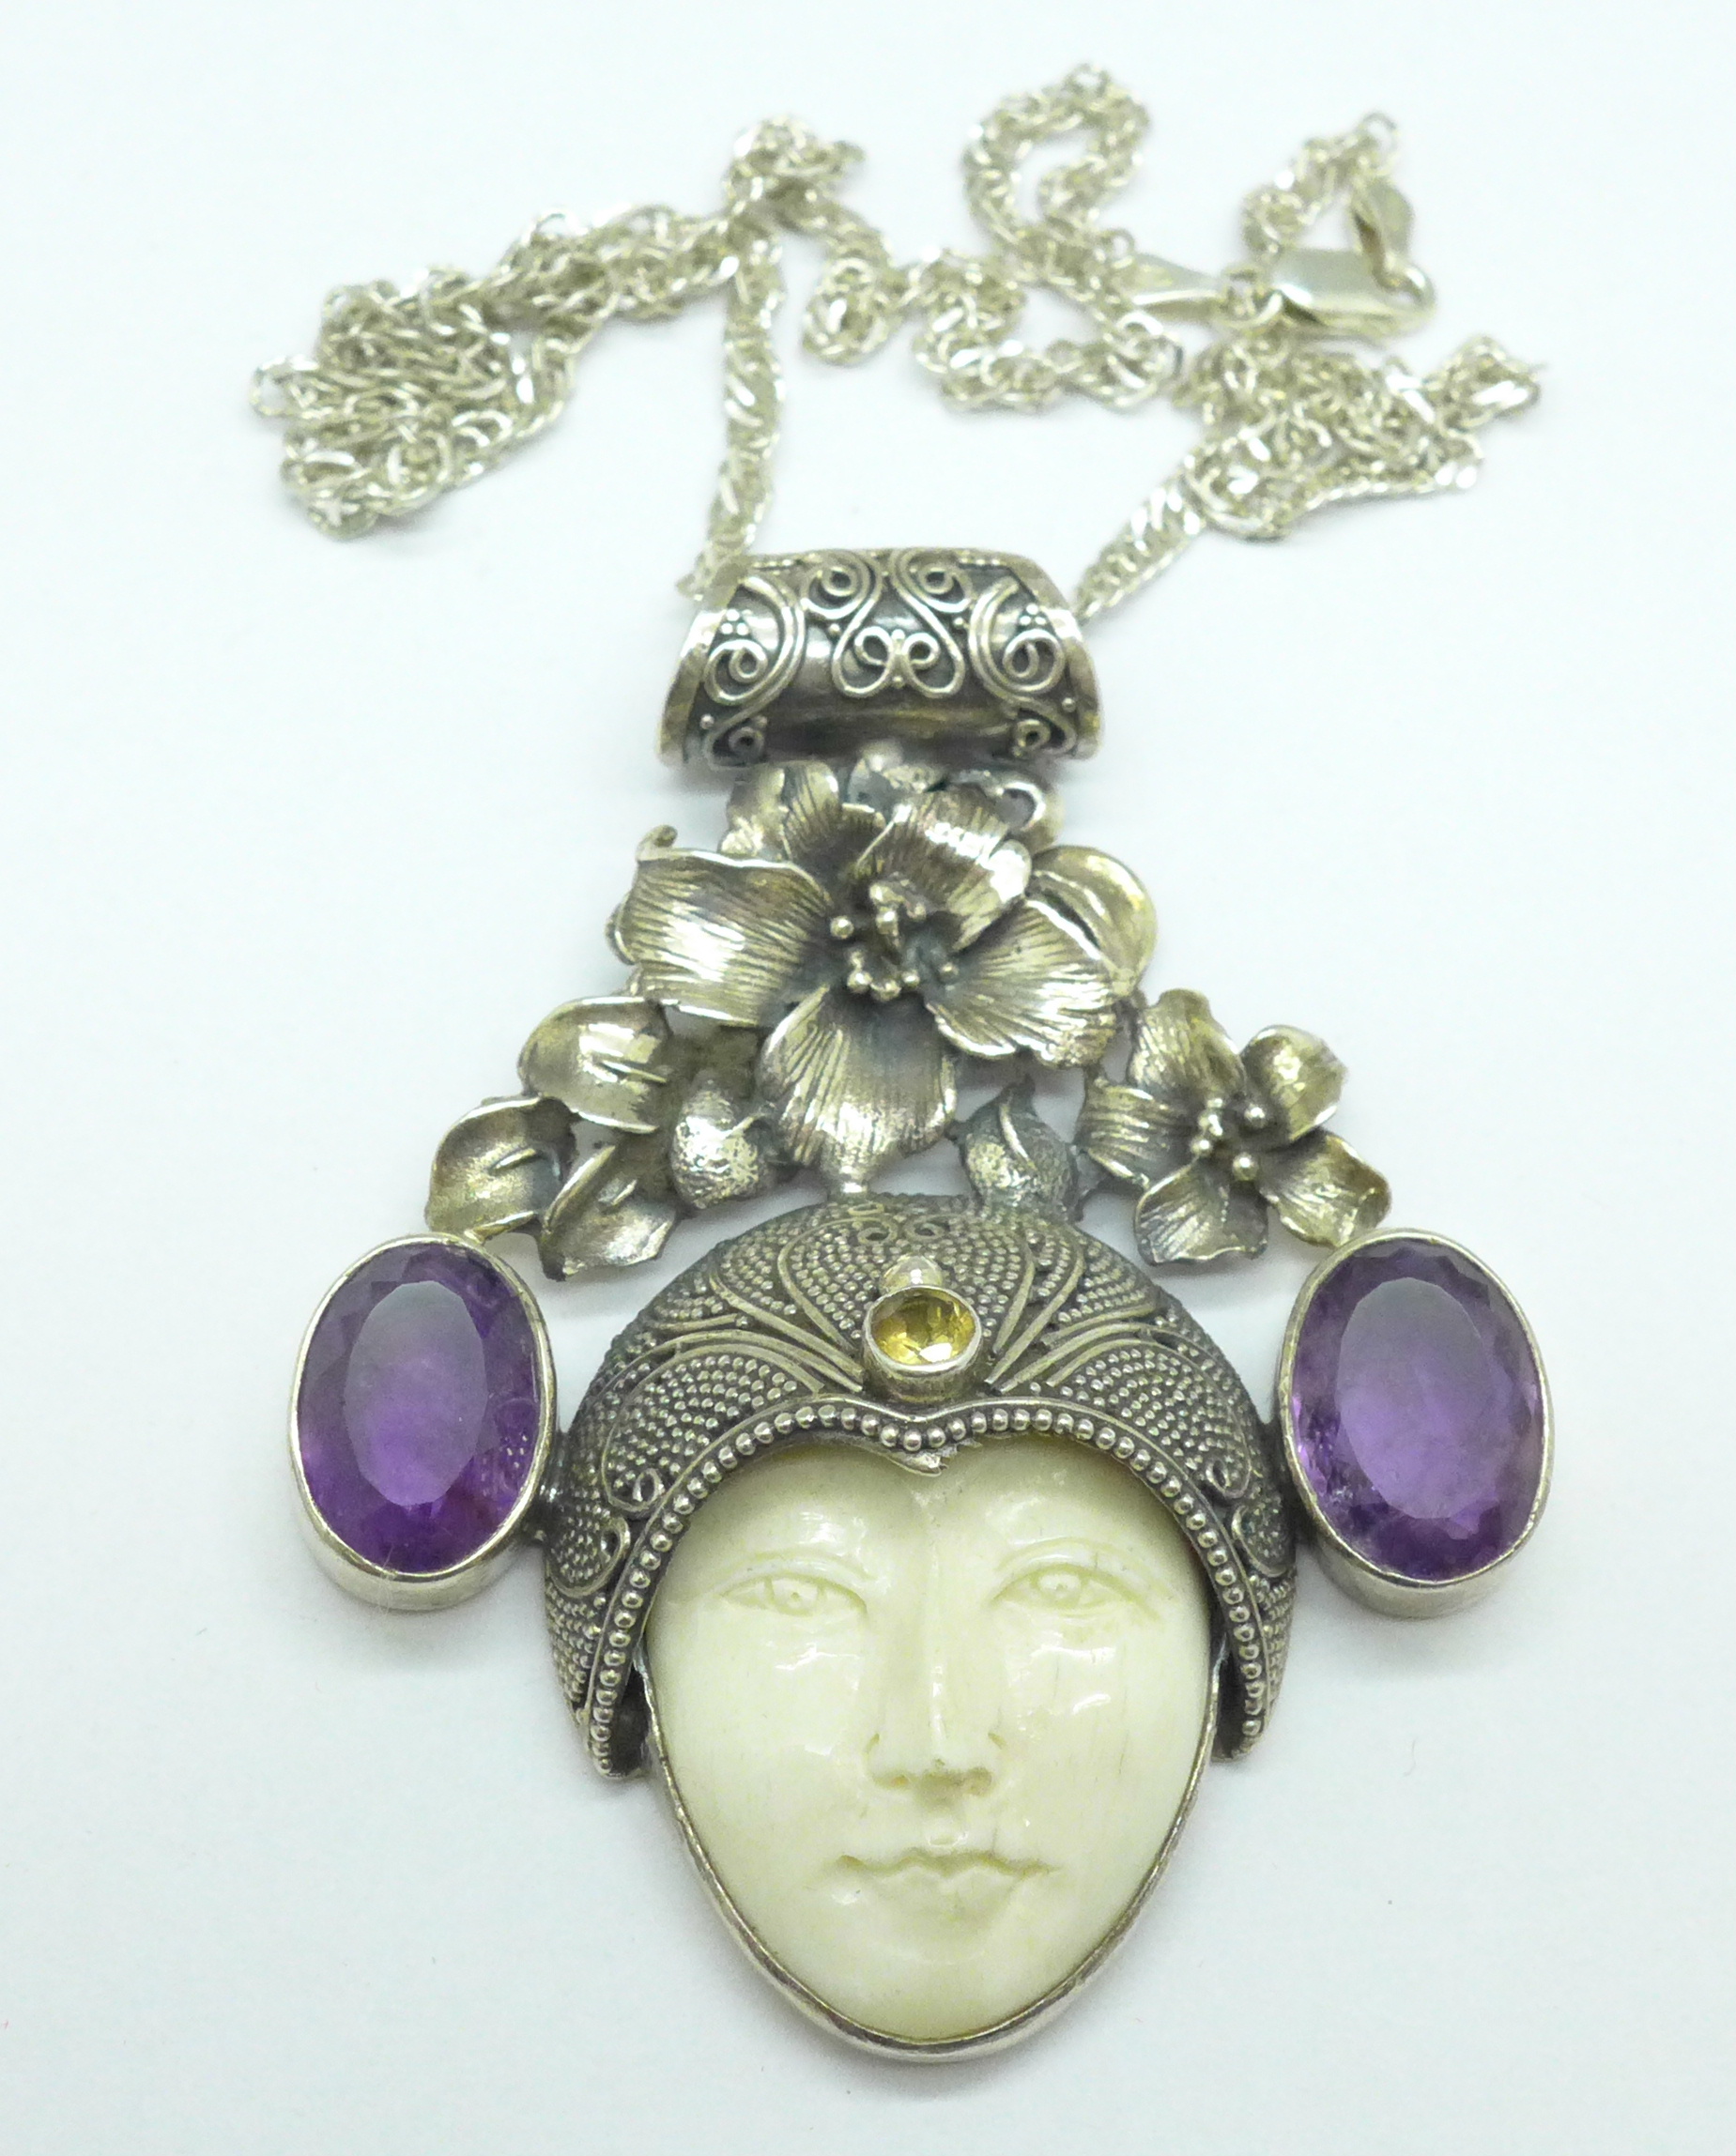 An Art Nouveau style silver pendant and chain set with amethyst